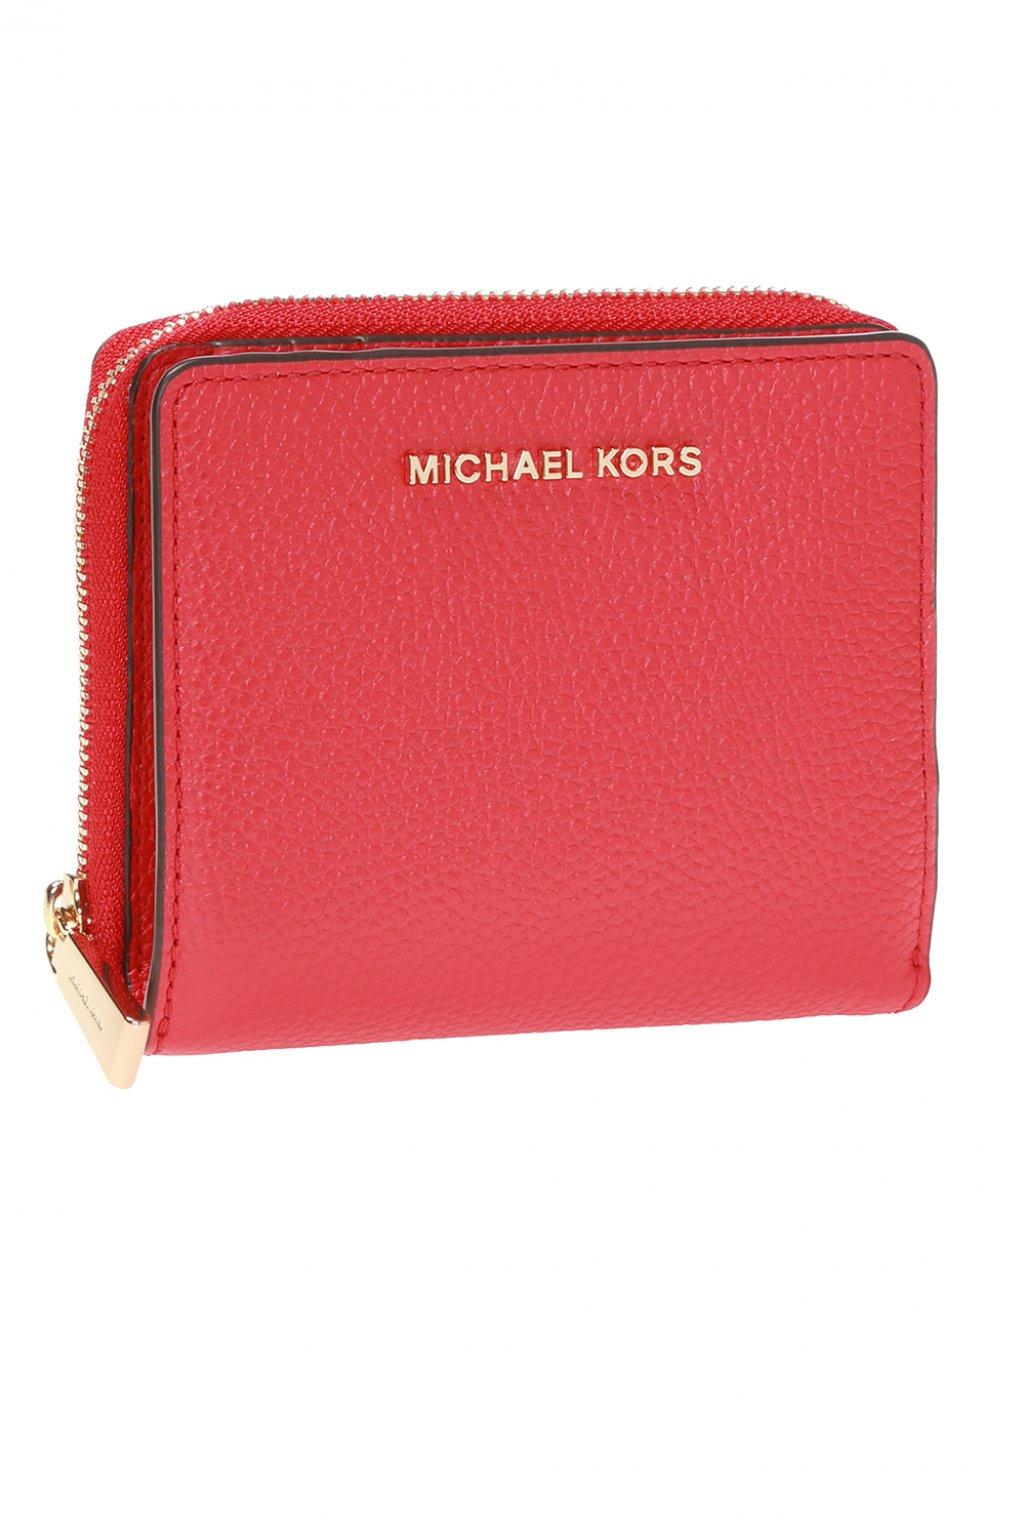 Michael Kors Leather Wallet With Metal Logo in Red - Lyst